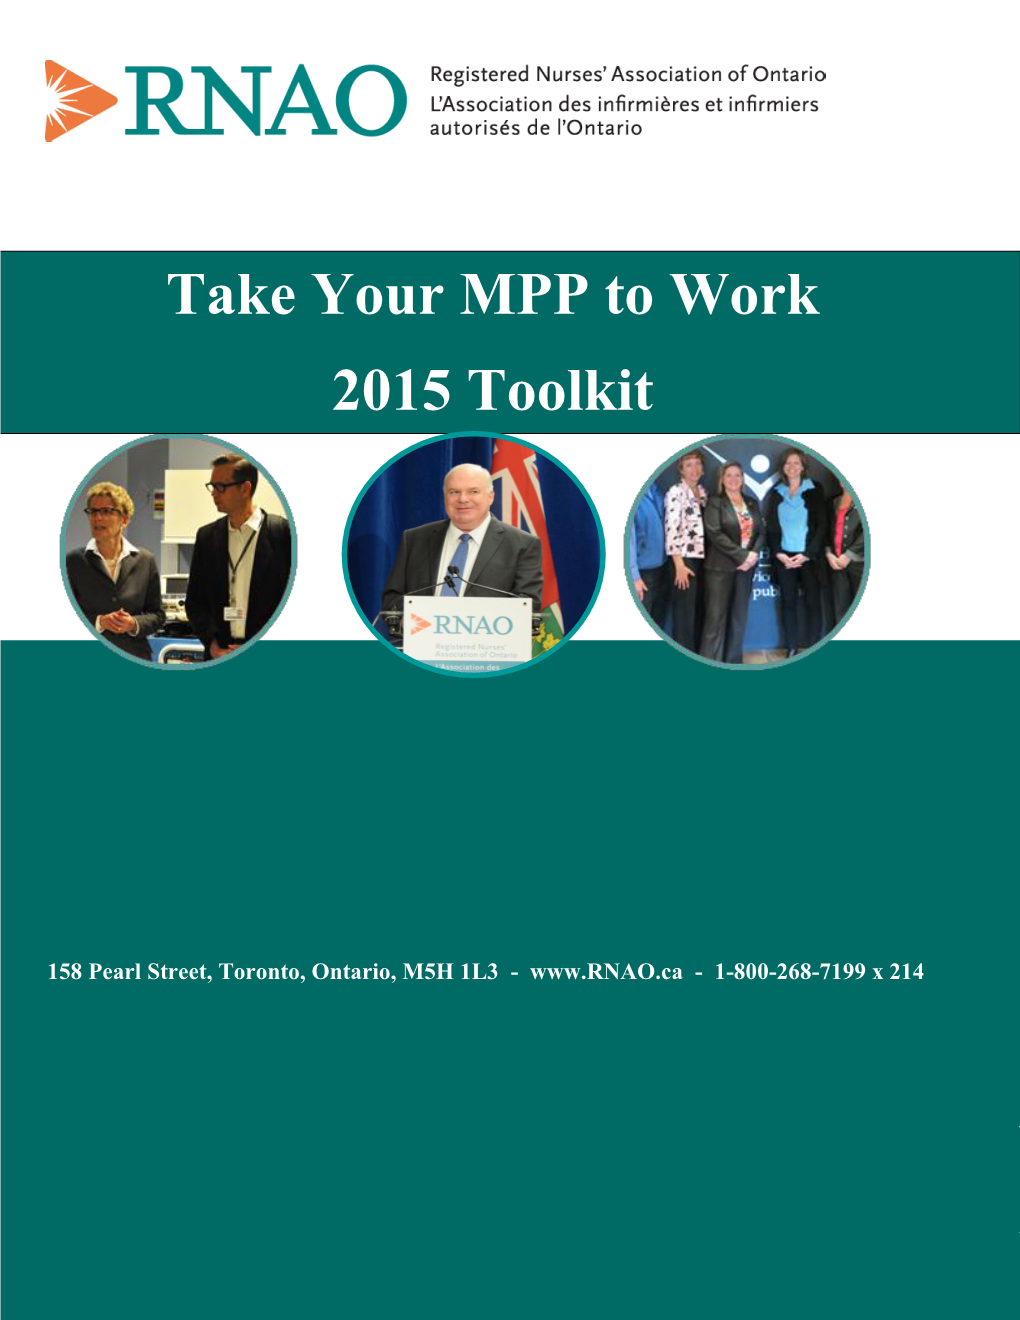 Take Your MPP to Work 2015 Toolkit